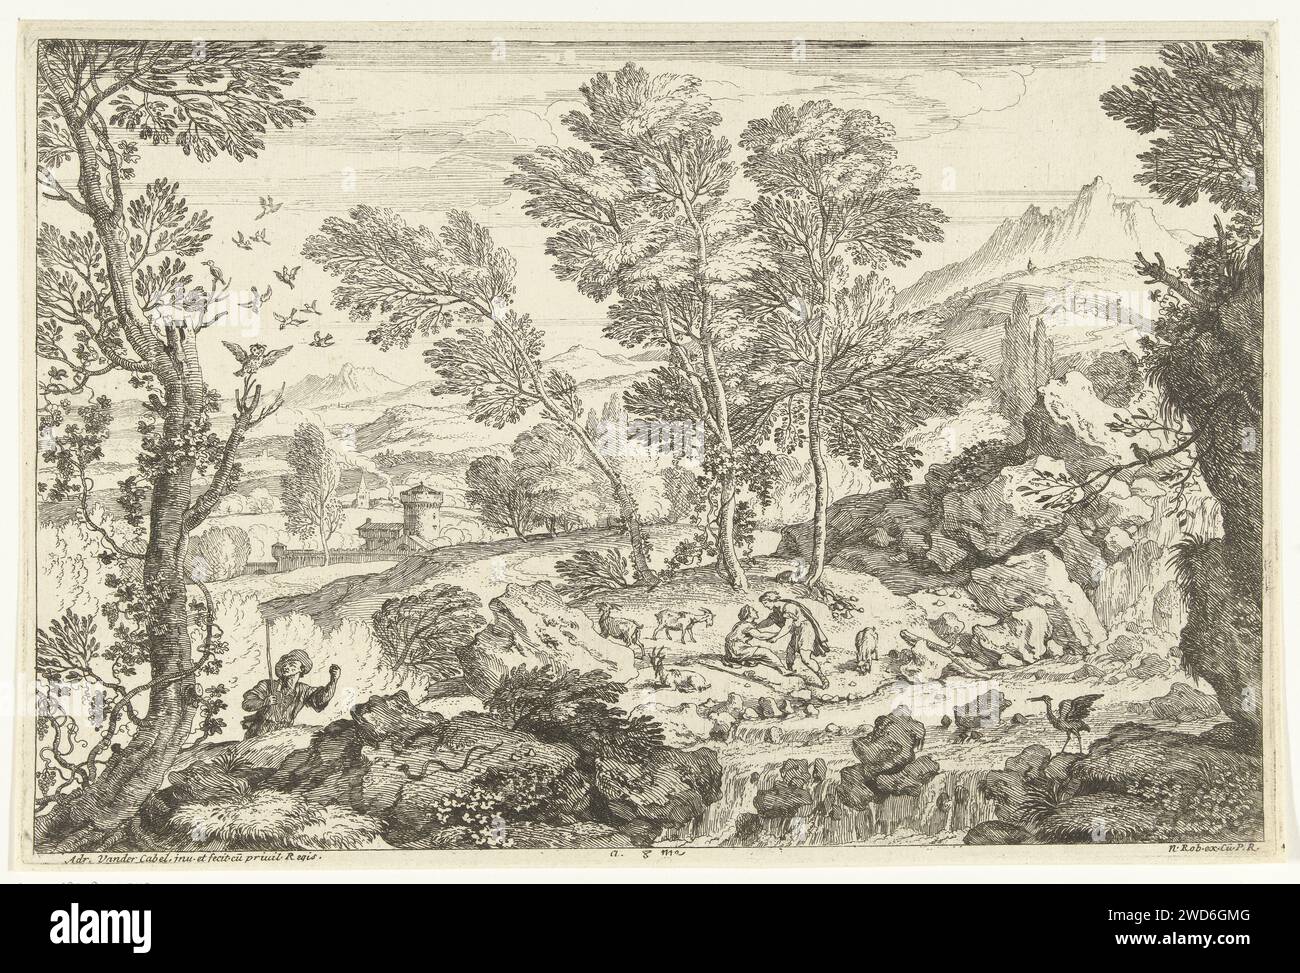 Landscape with waterfall and various animals, Adriaen van der Kabel, 1648 - 1705 print Landscape with in the foreground, on the left, a man with a stick looking up to a tree in which an owl. On the rock for him a snake and a running bird with spread wings at the waterfall. On the other side of the river two people between a few goats. In the background a mountain landscape with different villages. France (possibly) paper etching landscapes. owls Stock Photo